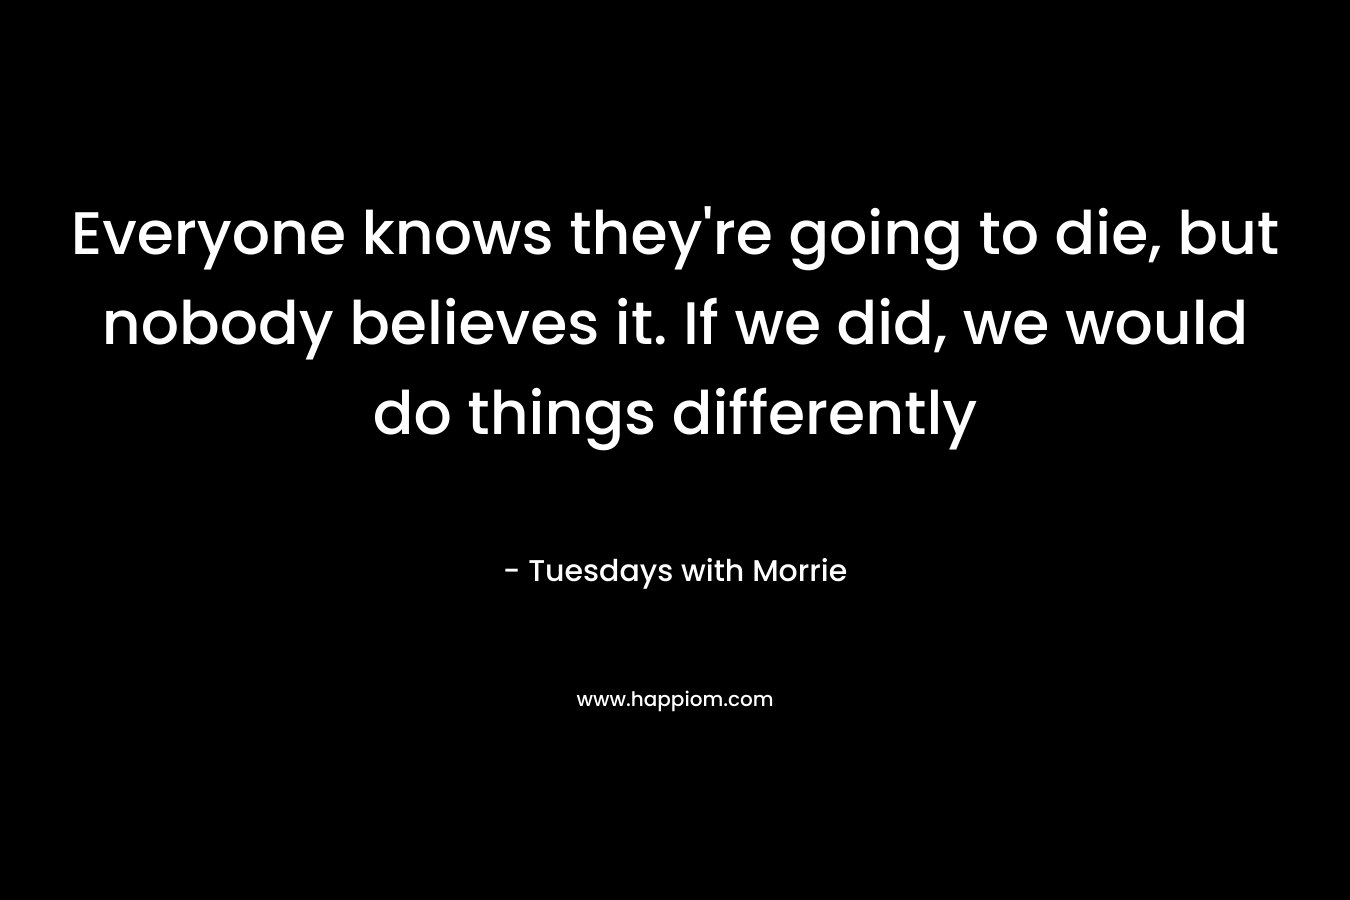 Everyone knows they're going to die, but nobody believes it. If we did, we would do things differently